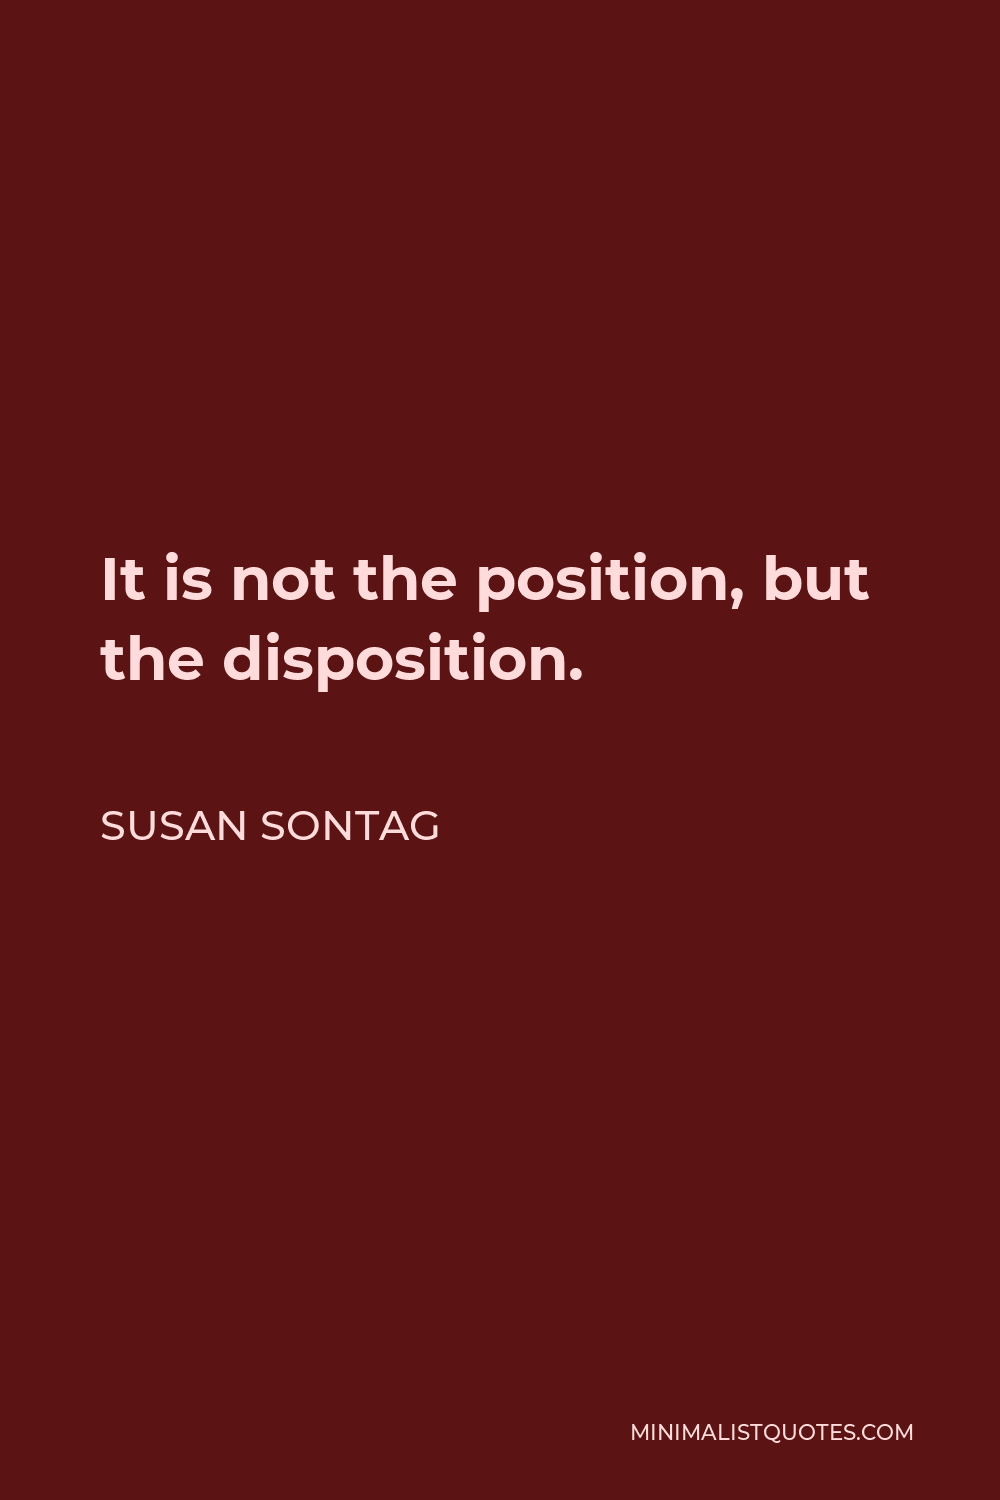 Susan Sontag Quote - It is not the position, but the disposition.